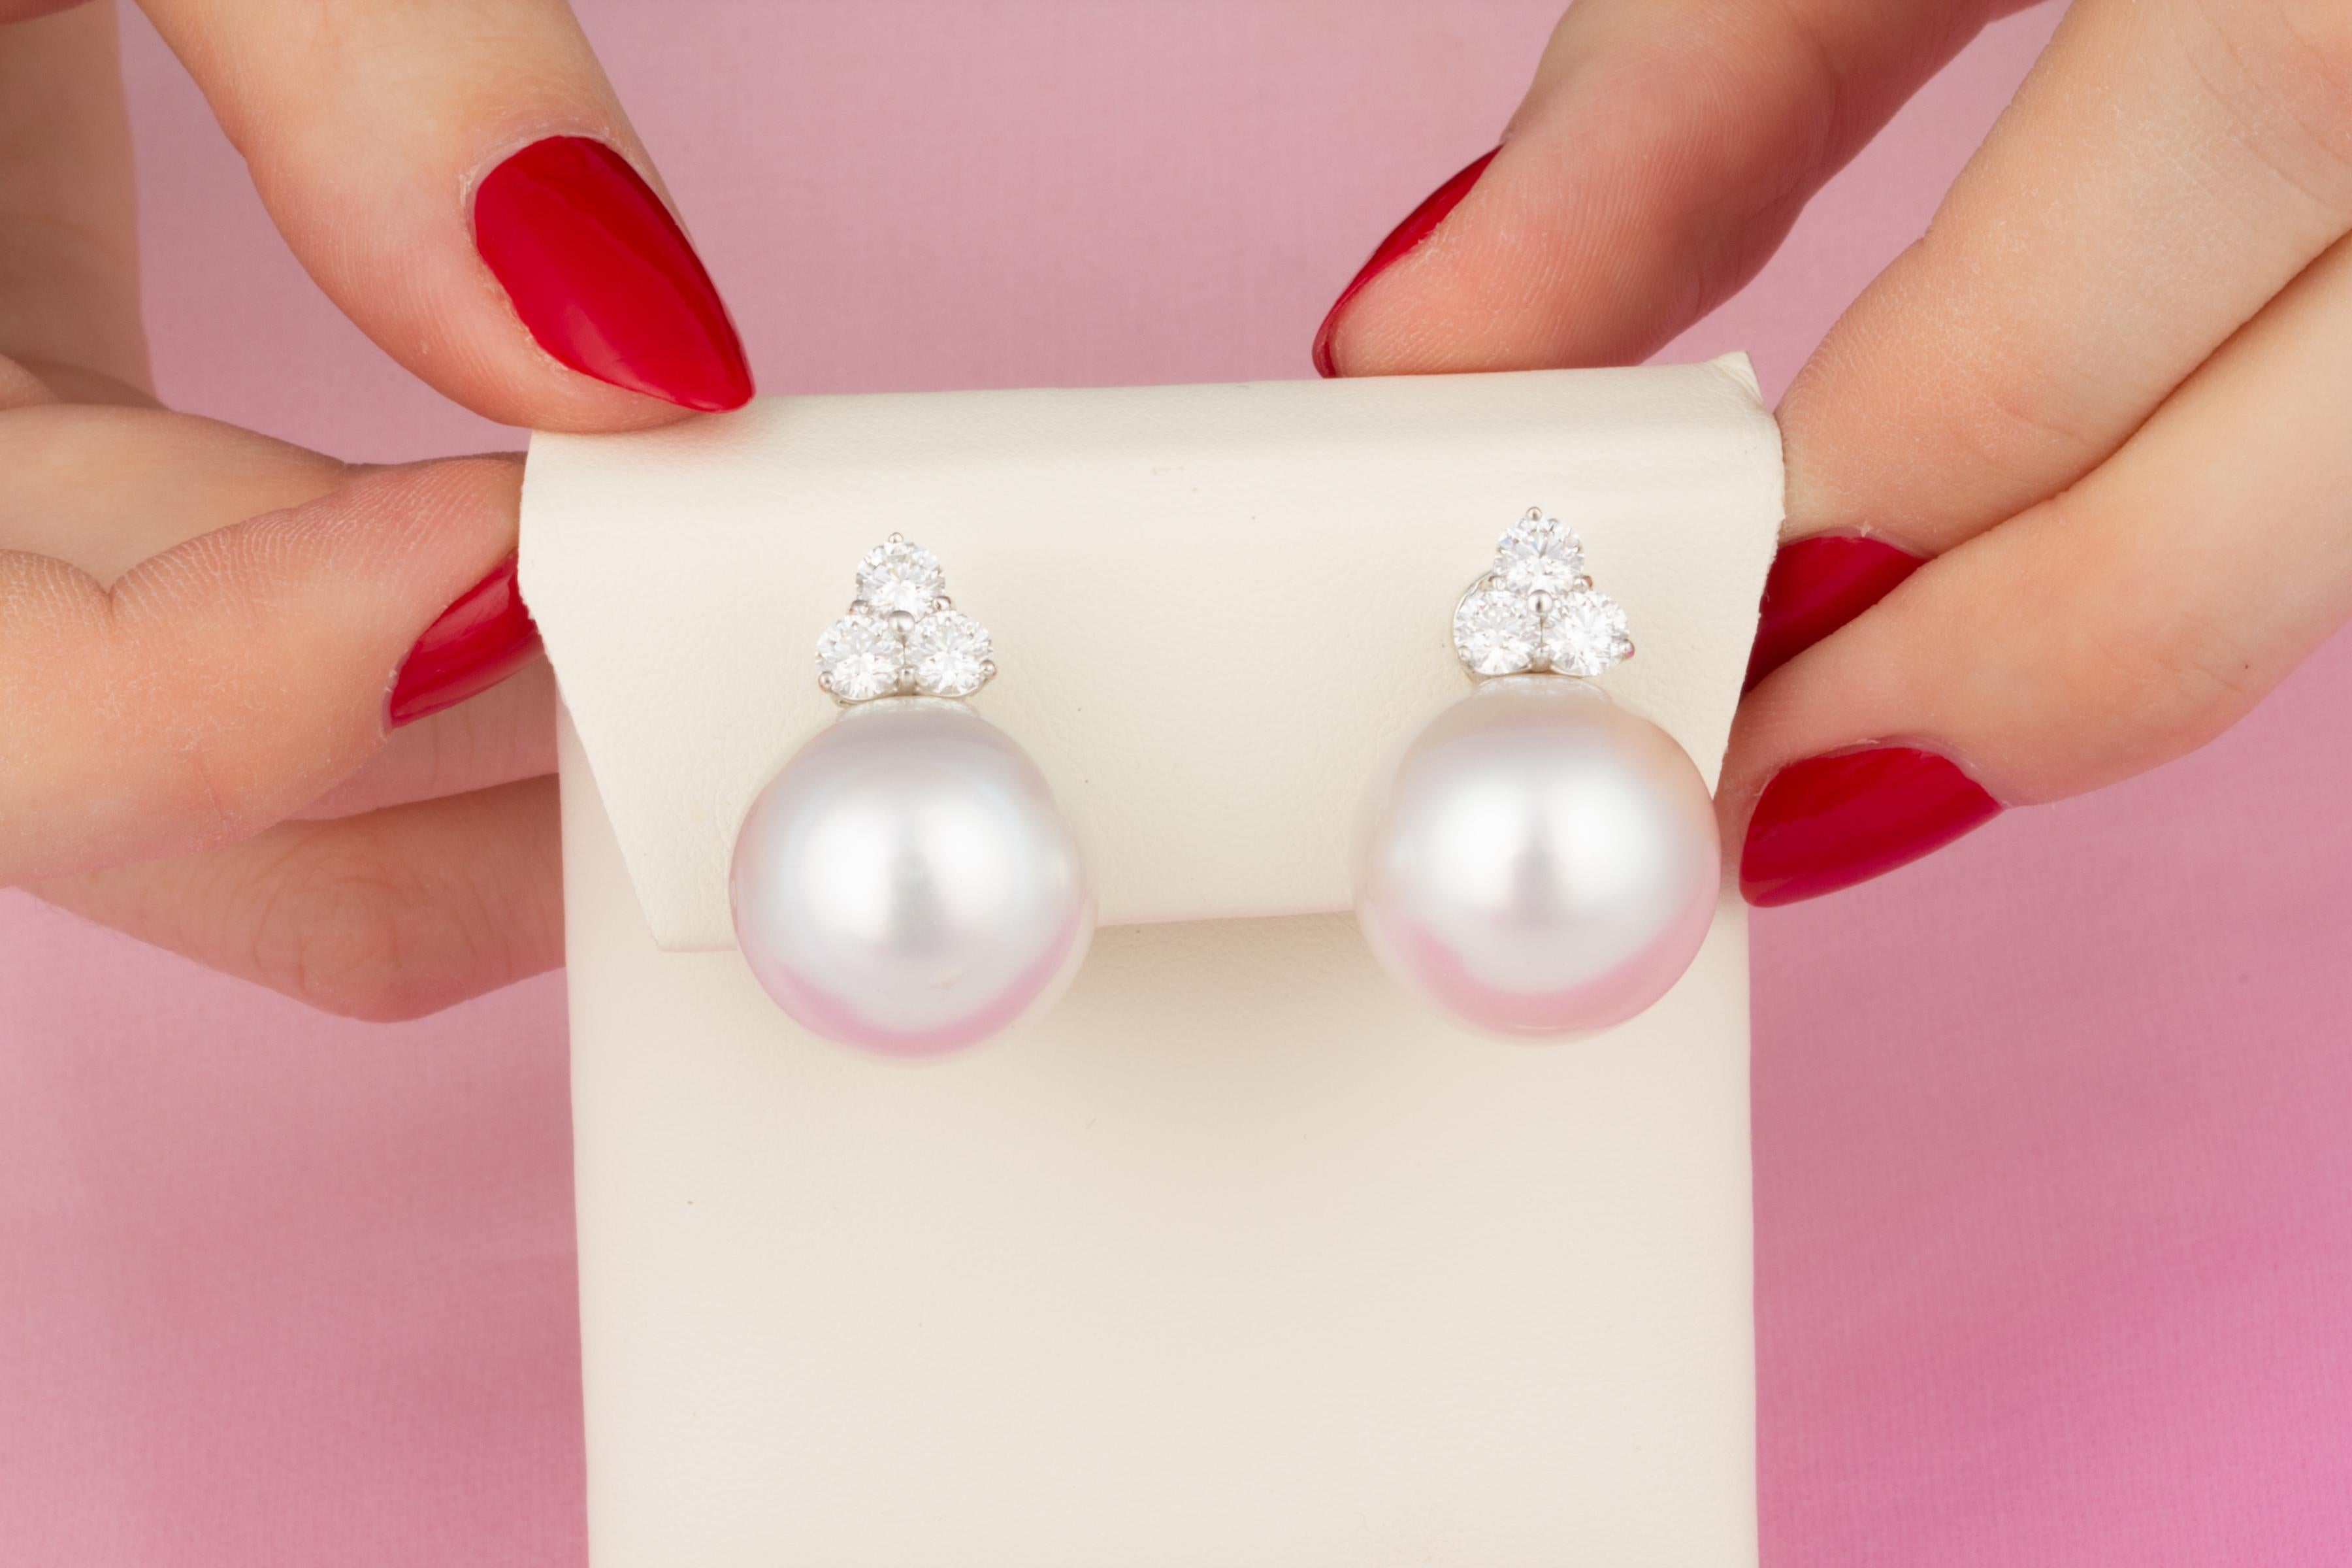 This pair of earrings features two very large and splendid South Sea pearls of 17.5mm diameter with a diamond design.
The untreated South Sea pearls originate from the waters of Northwestern Australia. They display a lovely nacre and their natural